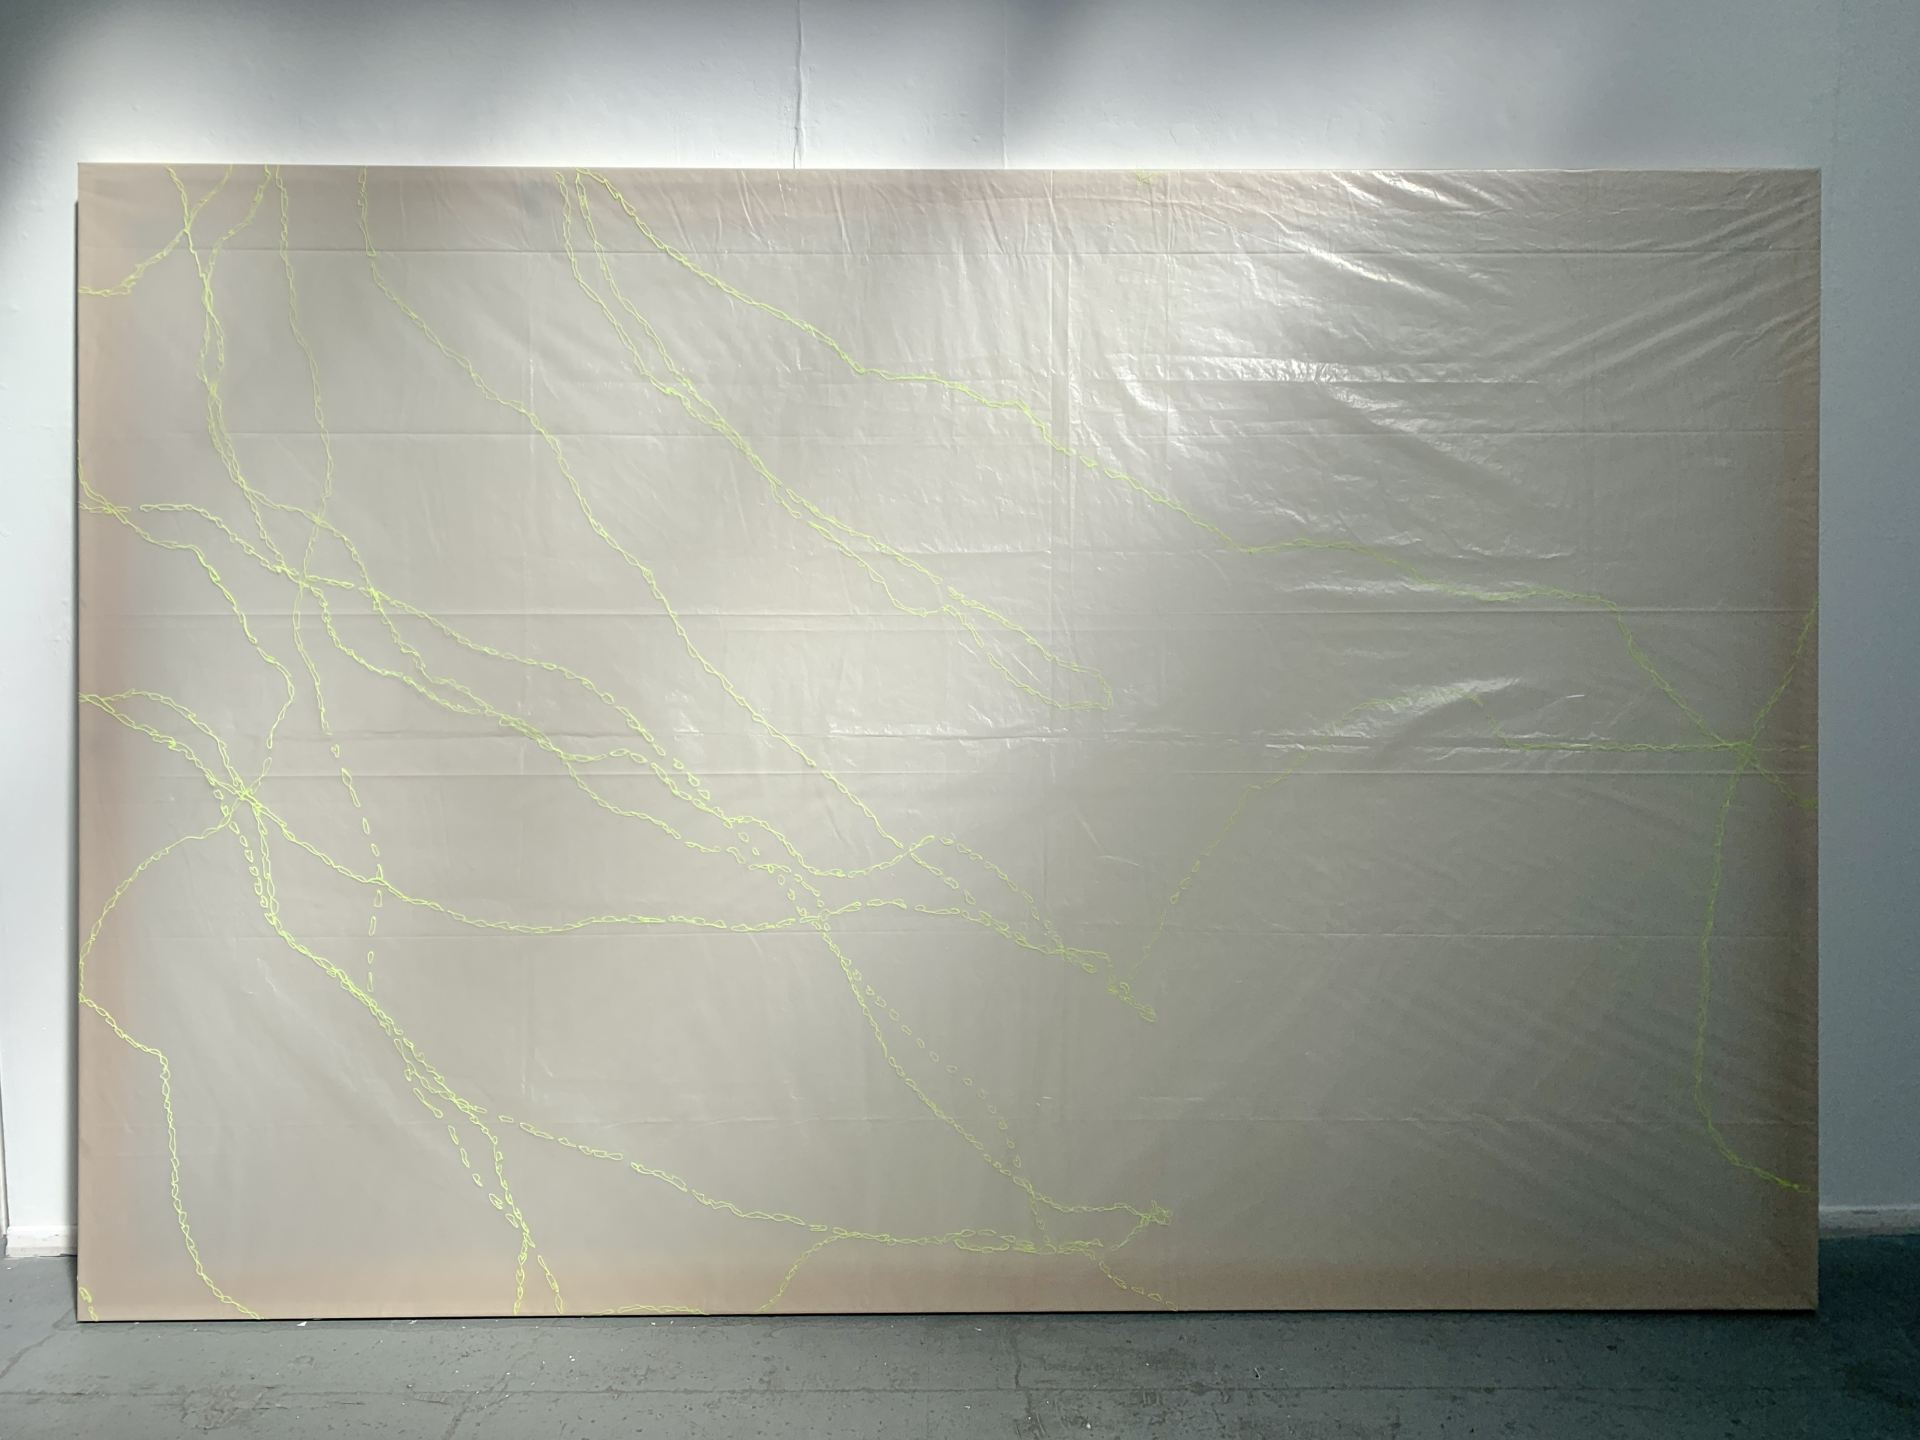 A polyethylene dust sheet is used as a canvas. Yellow embroidery runs across its surface.